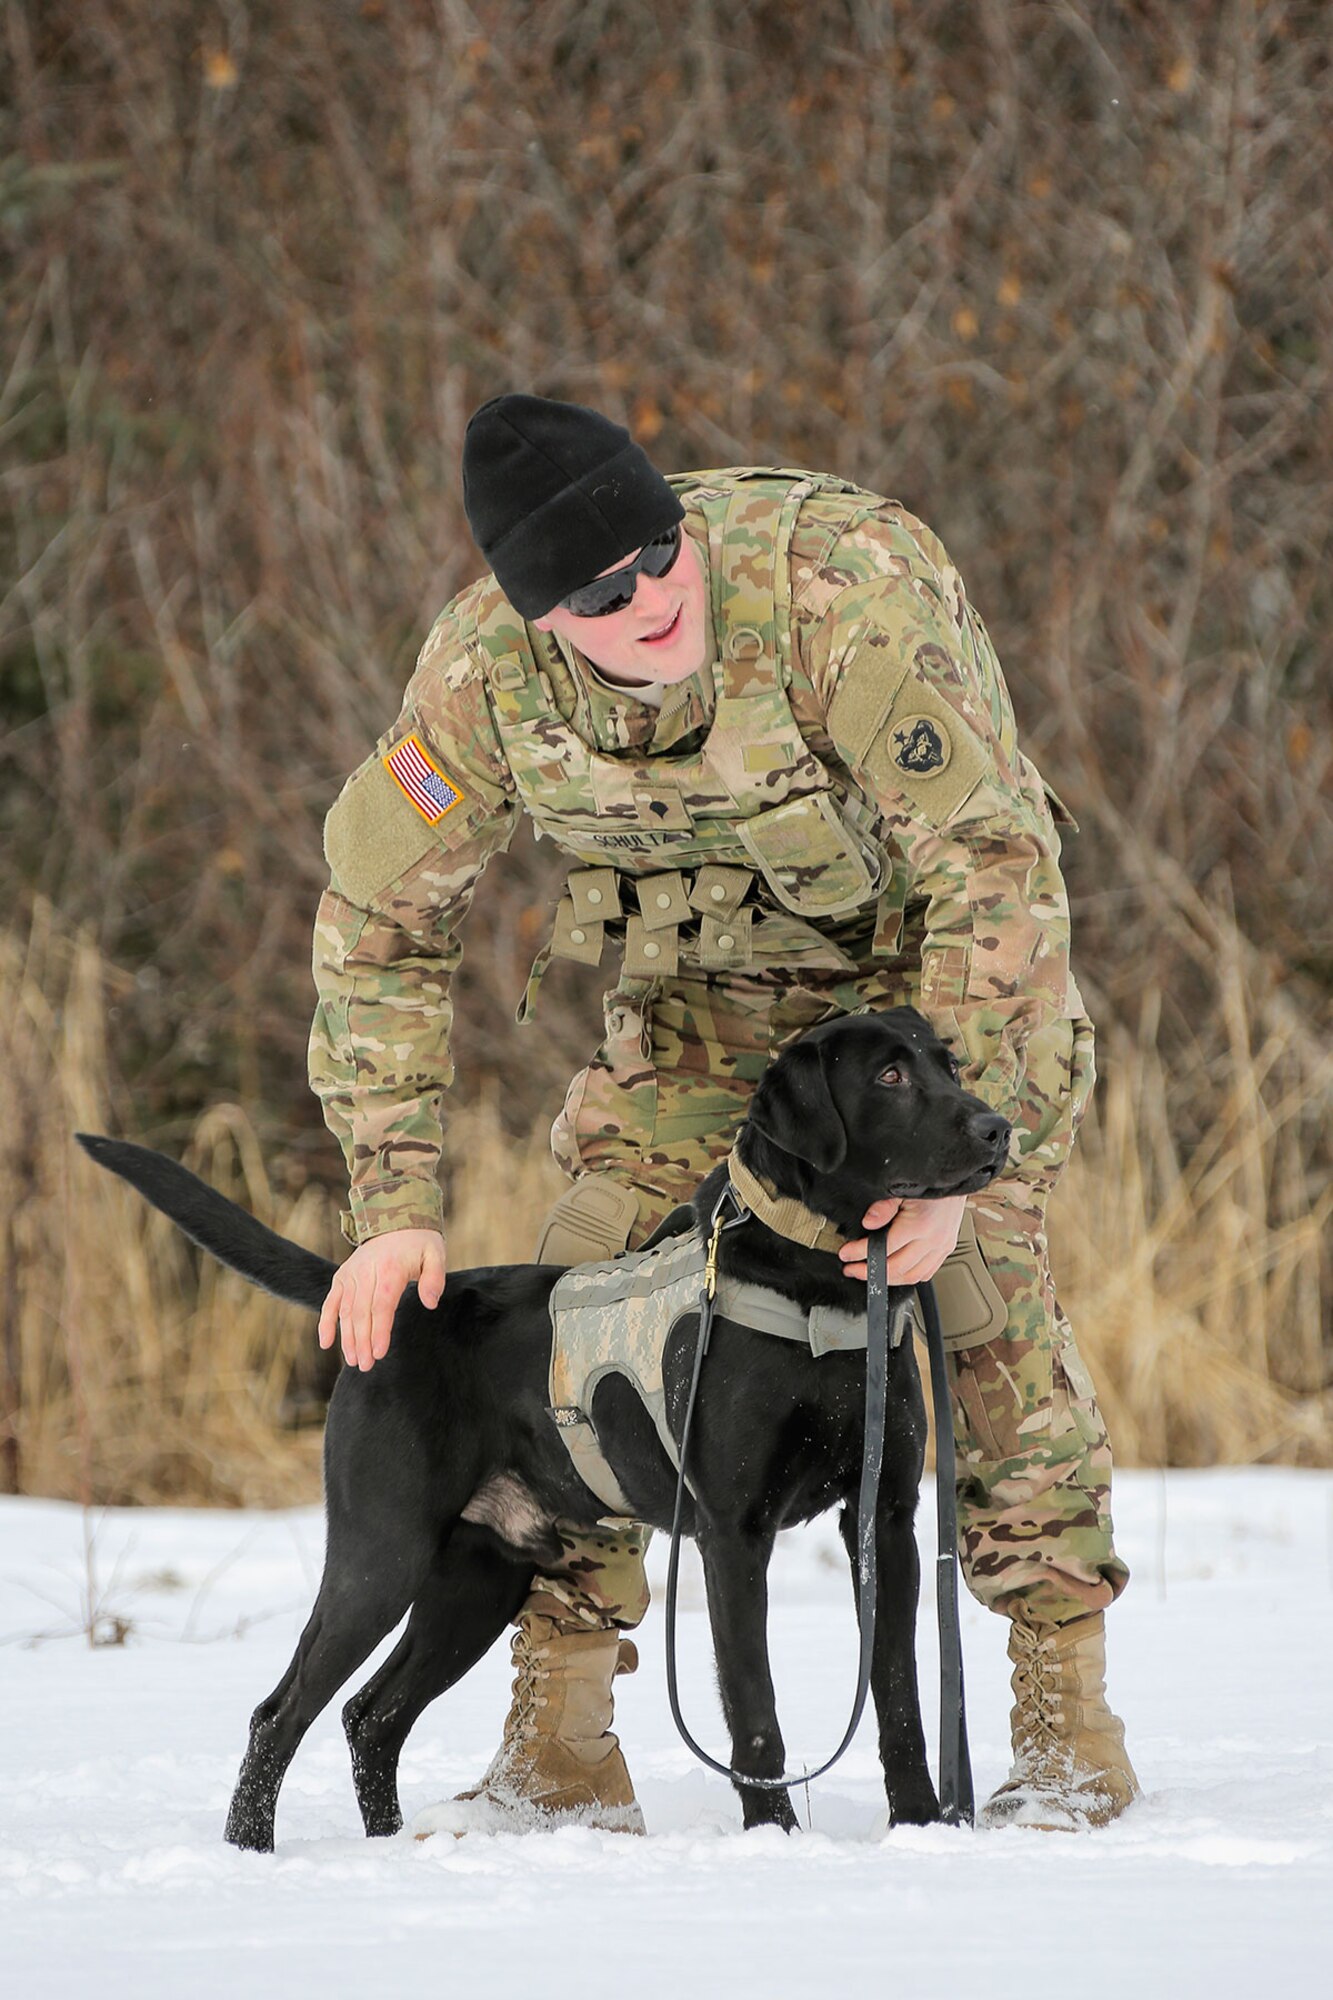 U.S. Army Spc. Jared Schultz and military working dog, Teddy, assigned to the 549th Military Working Dog Detachment, conduct K9 training at Joint Base Elmendorf-Richardson, Alaska, March 17, 2016. The Army military working dog handlers conducted the K9 training with their Air Force counterparts, assigned to the 673d Security Forces Squadron, to keep their teams flexible to respond to law enforcement emergencies and for overseas deployments. (U.S. Air Force photo/Alejandro Peña)